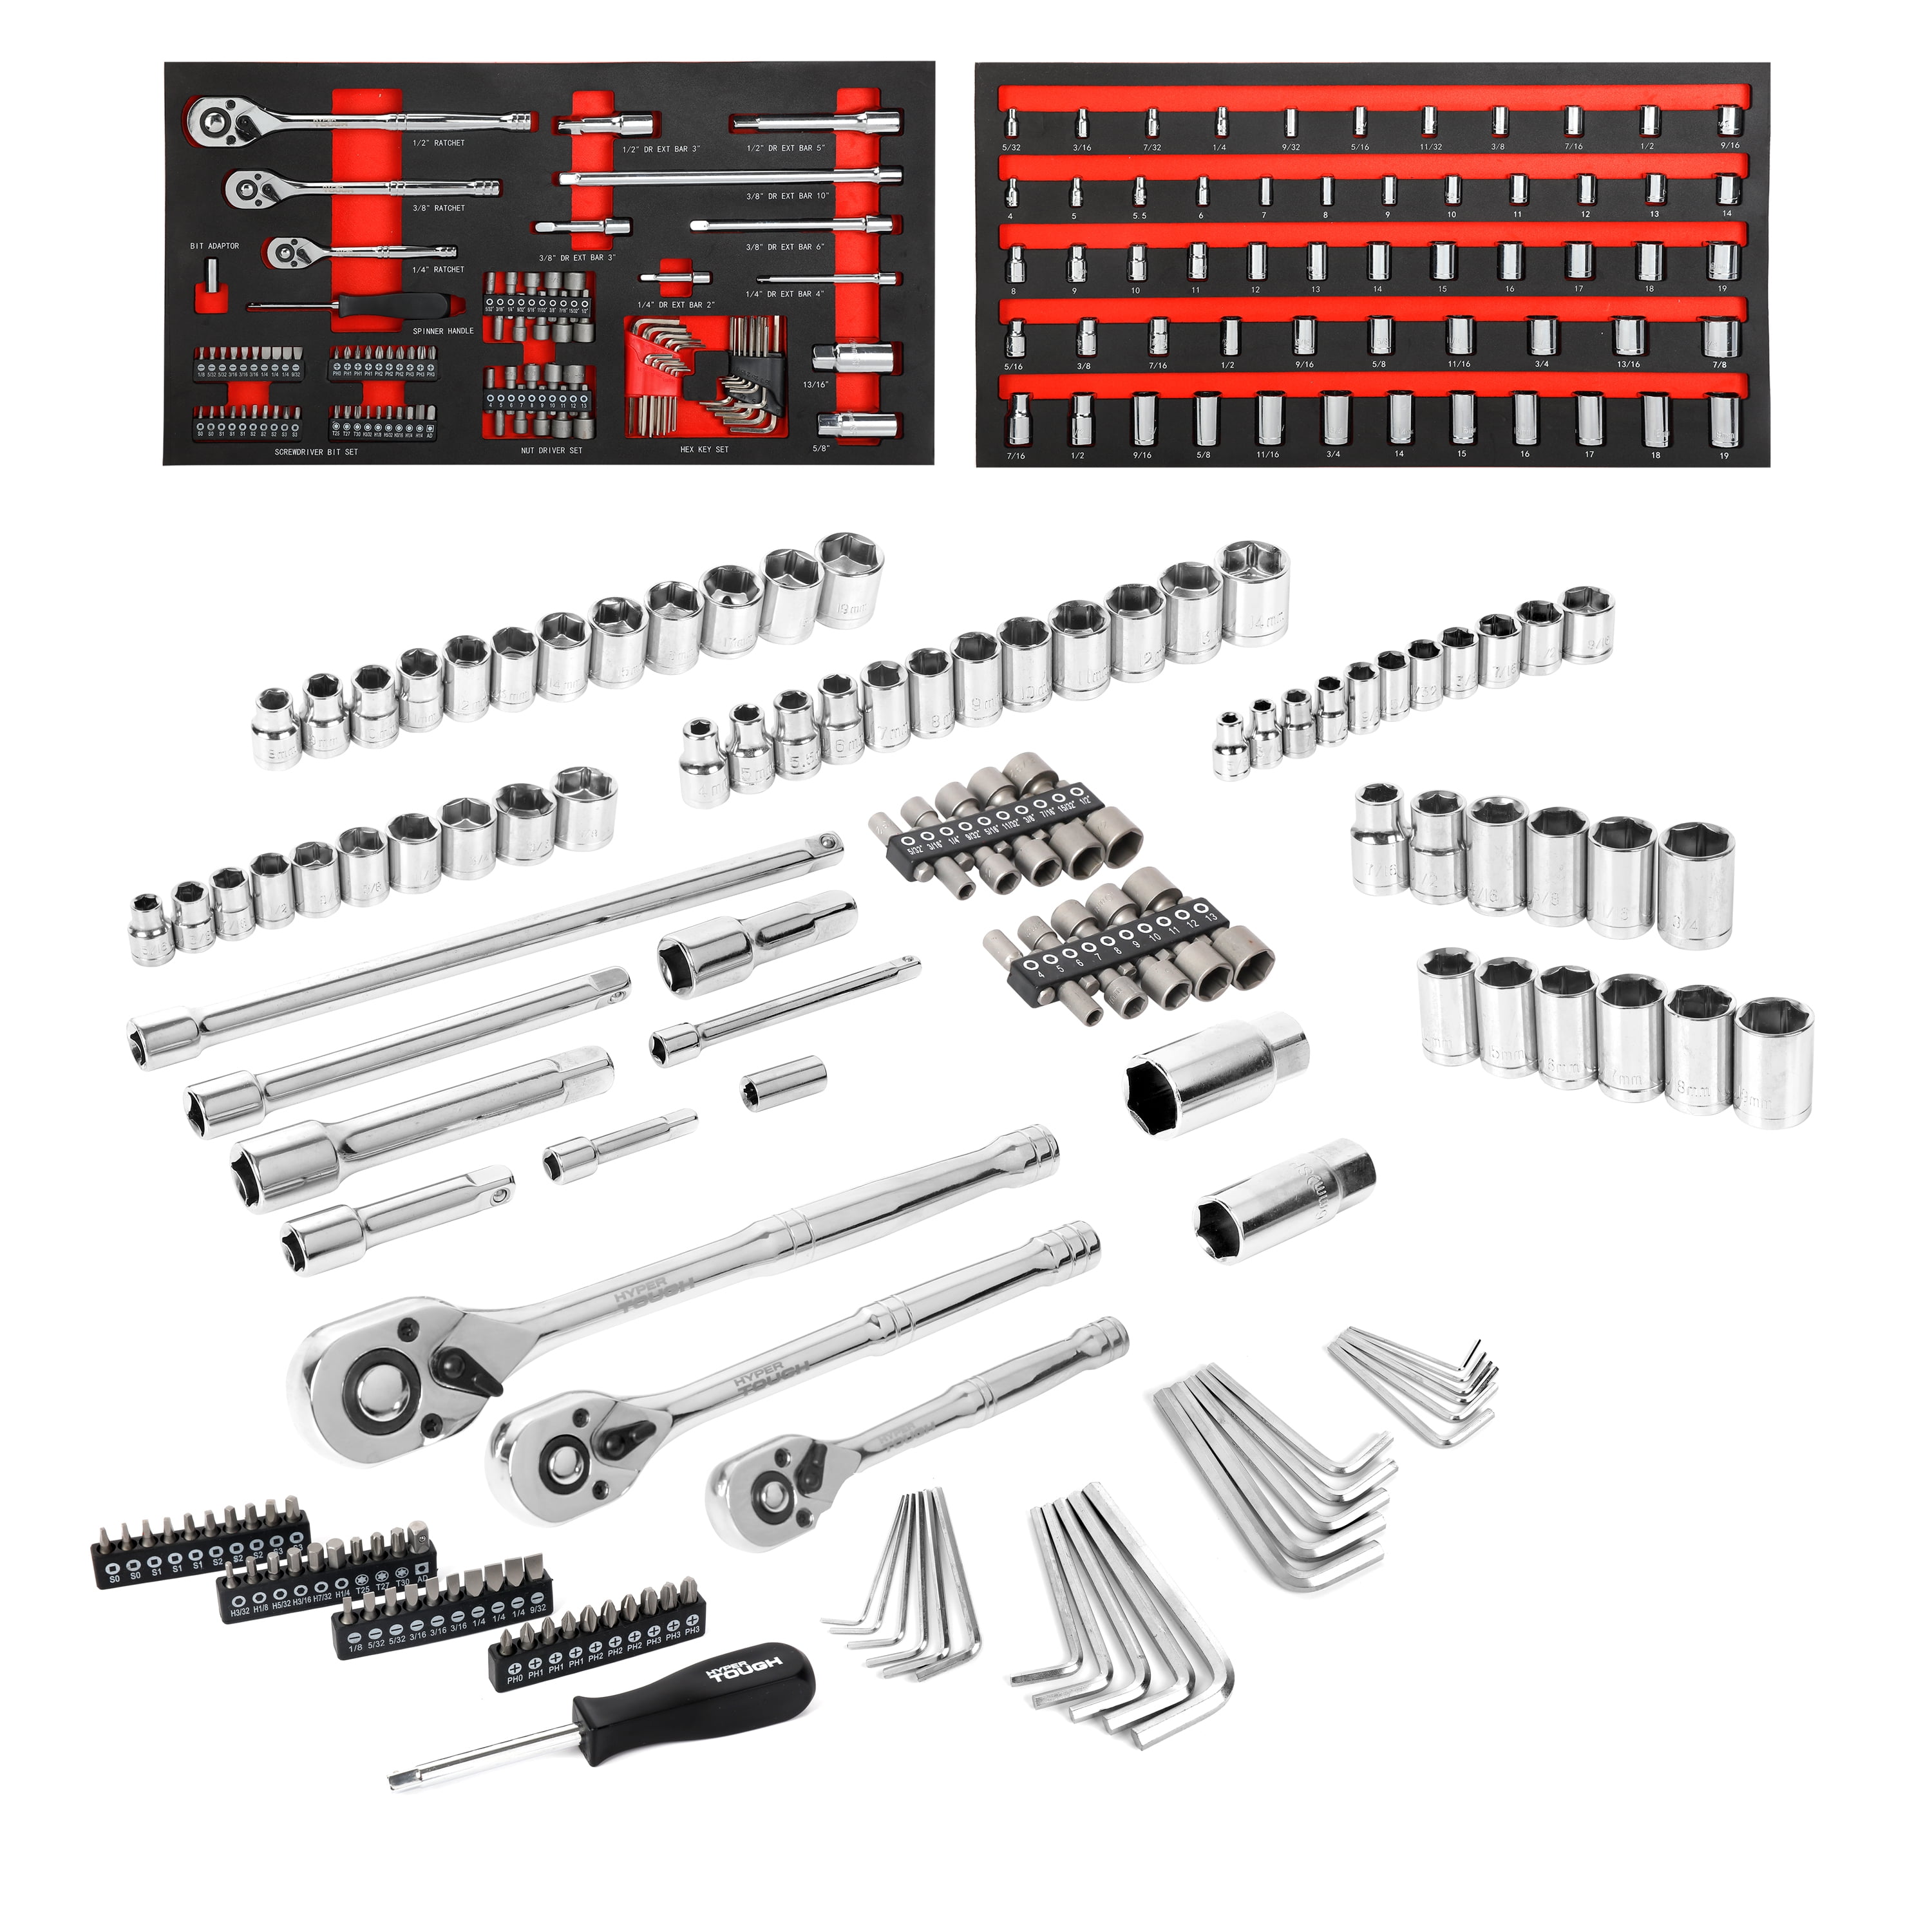 Hyper Tough 153-Piece Mechanic Tool Set, 1/4-inch, 3/8-inch, 1/2-inch Drive Ratchets and Sockets, Storage Trays